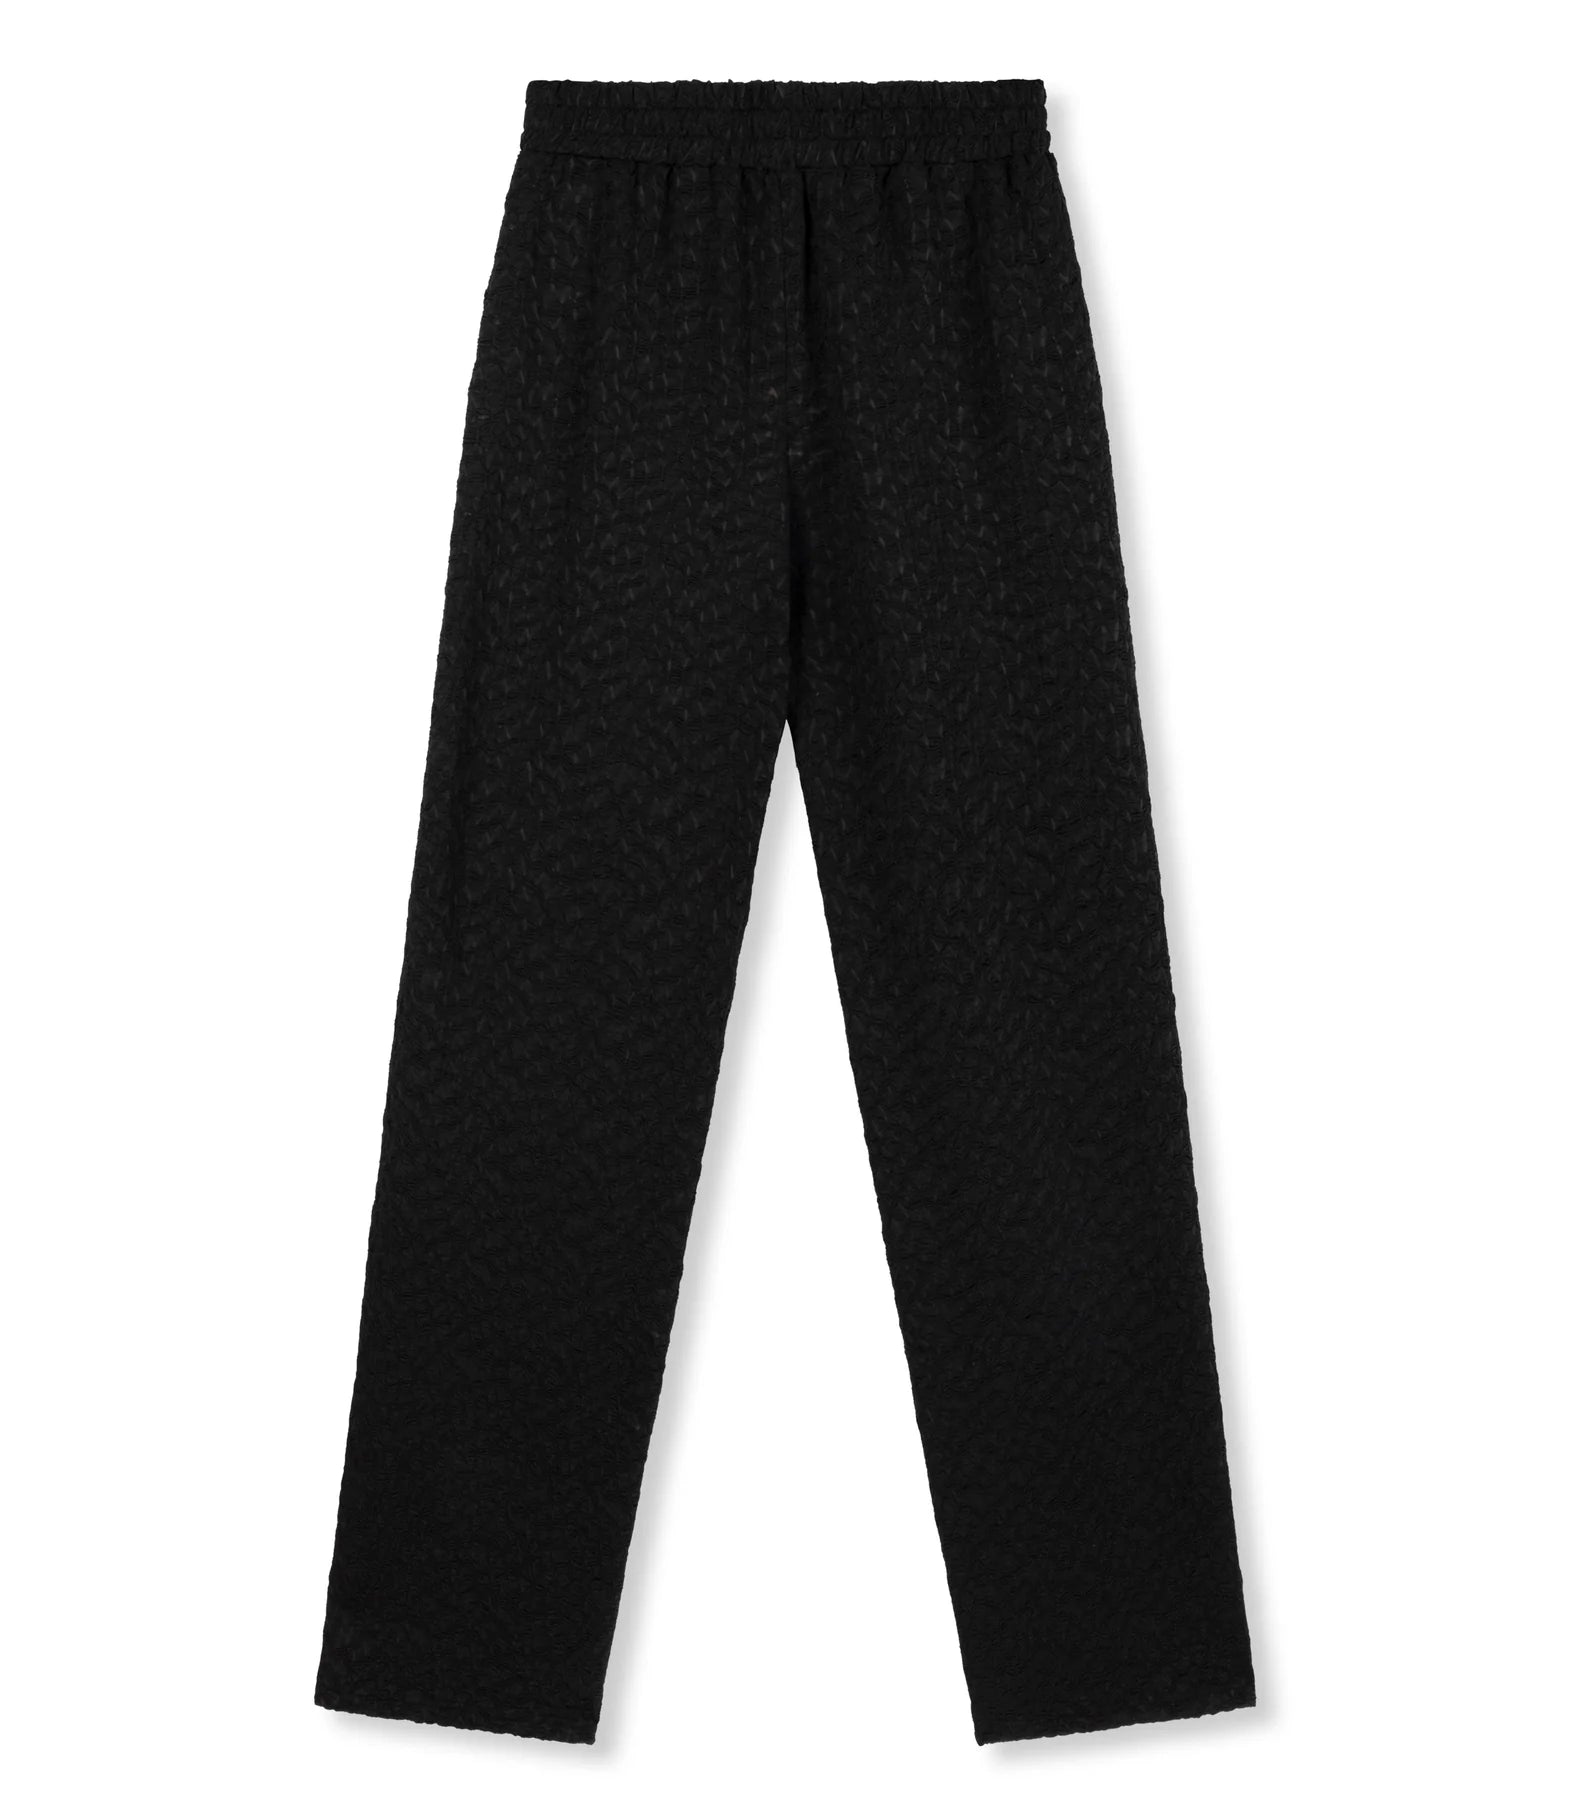 Refined Department Knitted Flowy Pants Nova